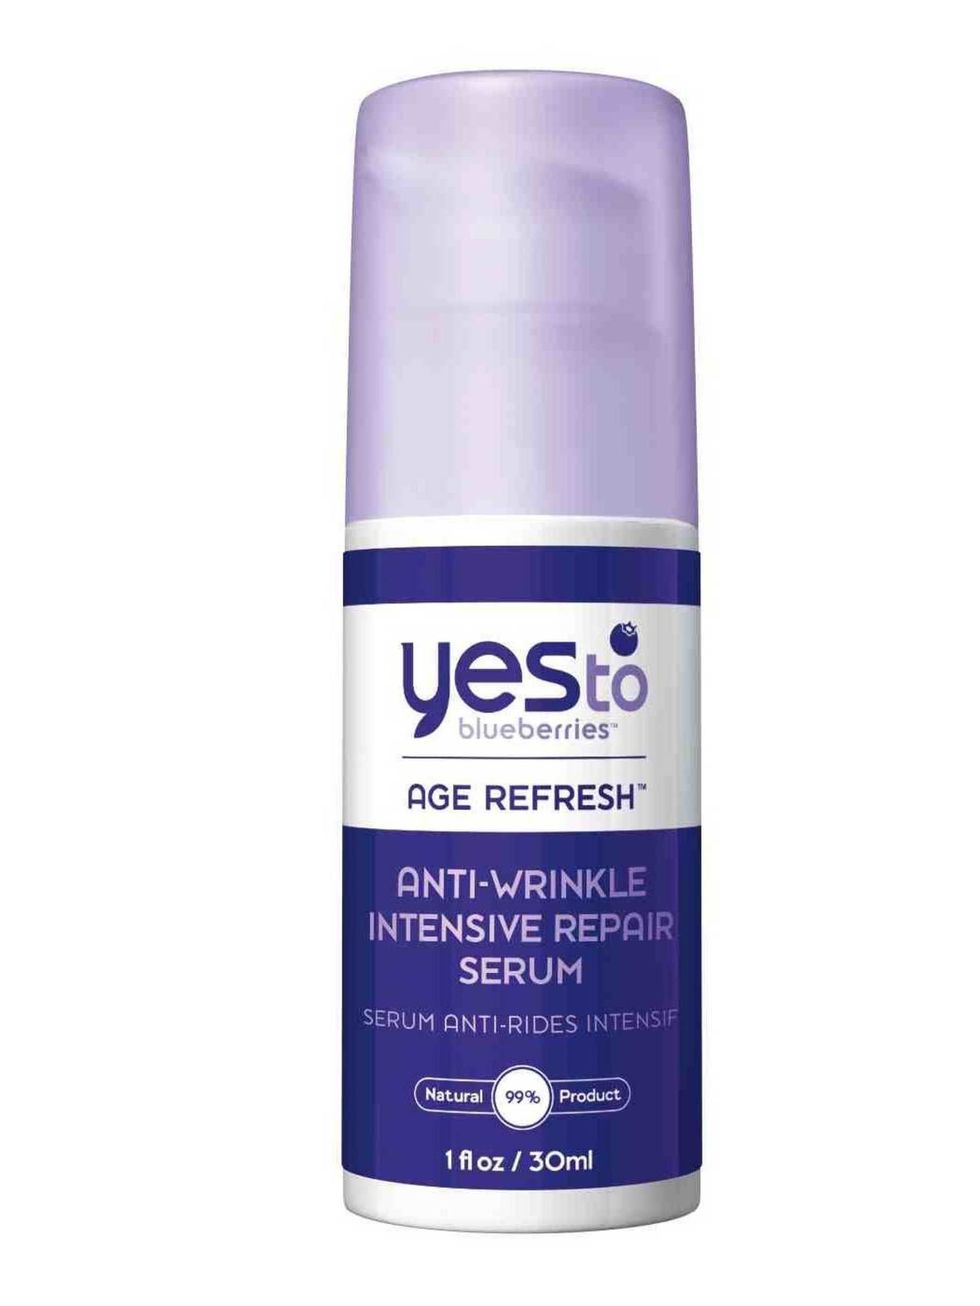 <p>Yes to Blueberries Anti-Wrinkle Intensive Repair Serum, £24.99 at <a href="http://www.victoriahealth.com/product/Anti-Wrinkle-Intensive-Repair-Serum/9500/0/?utm_source=gpl&amp;utm_medium=google&amp;utm_campaign=feed_20121">Victoria Health</a></p>